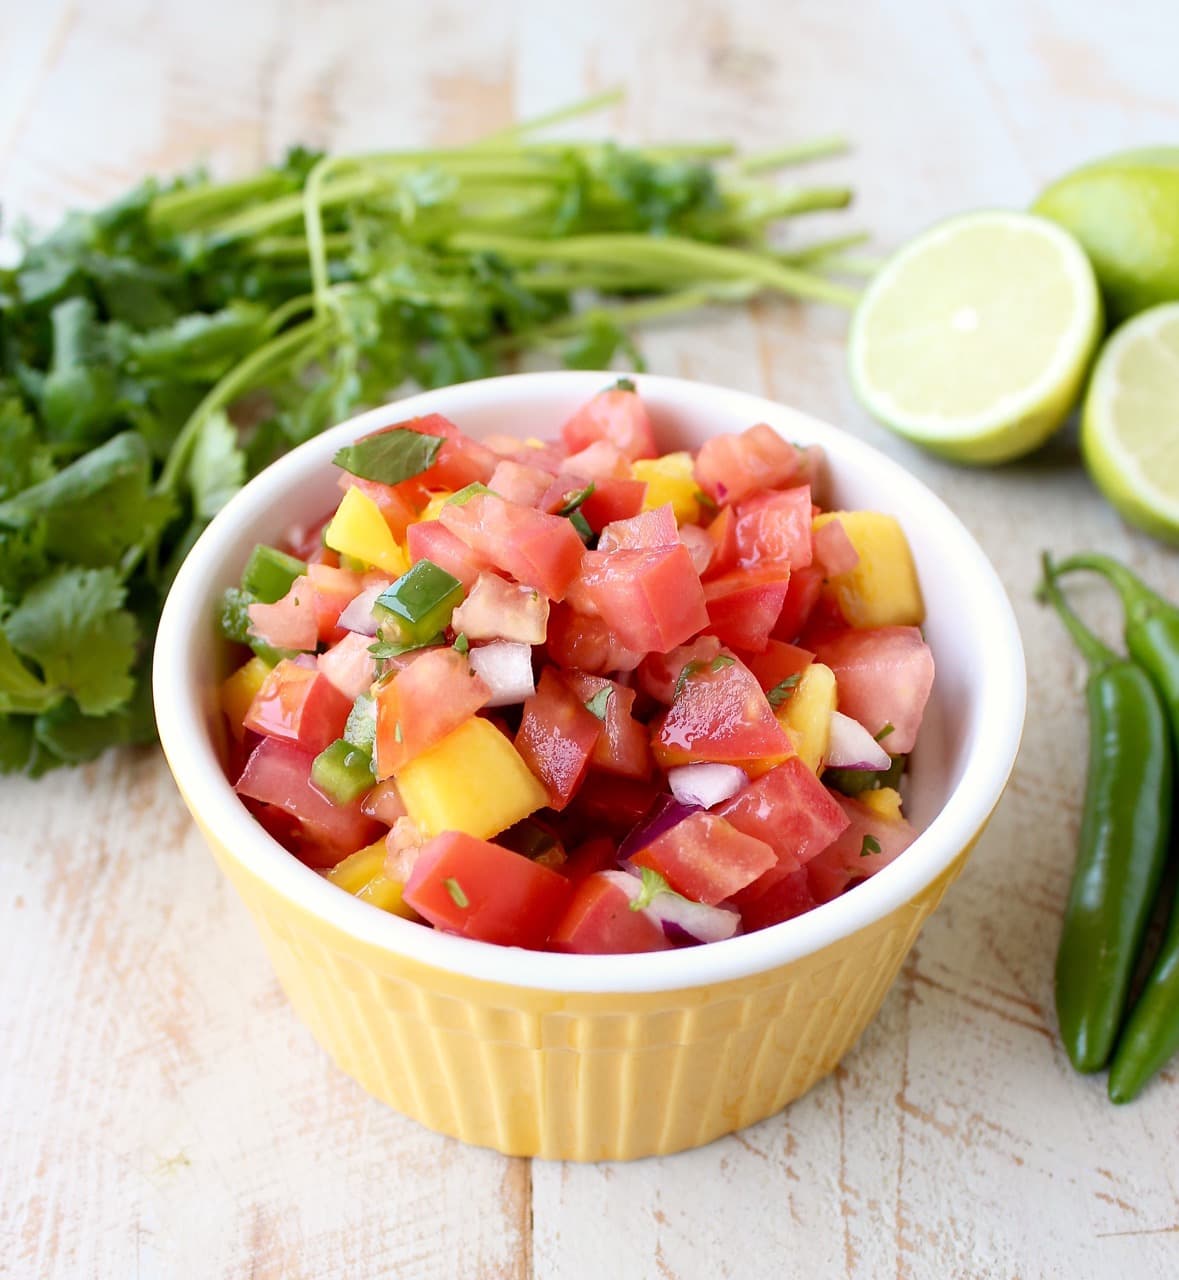 Toss this easy, homemade Tomato Mango Salsa recipe together in 5 minutes to serve on top of fresh fish, tacos or with chips for dipping!